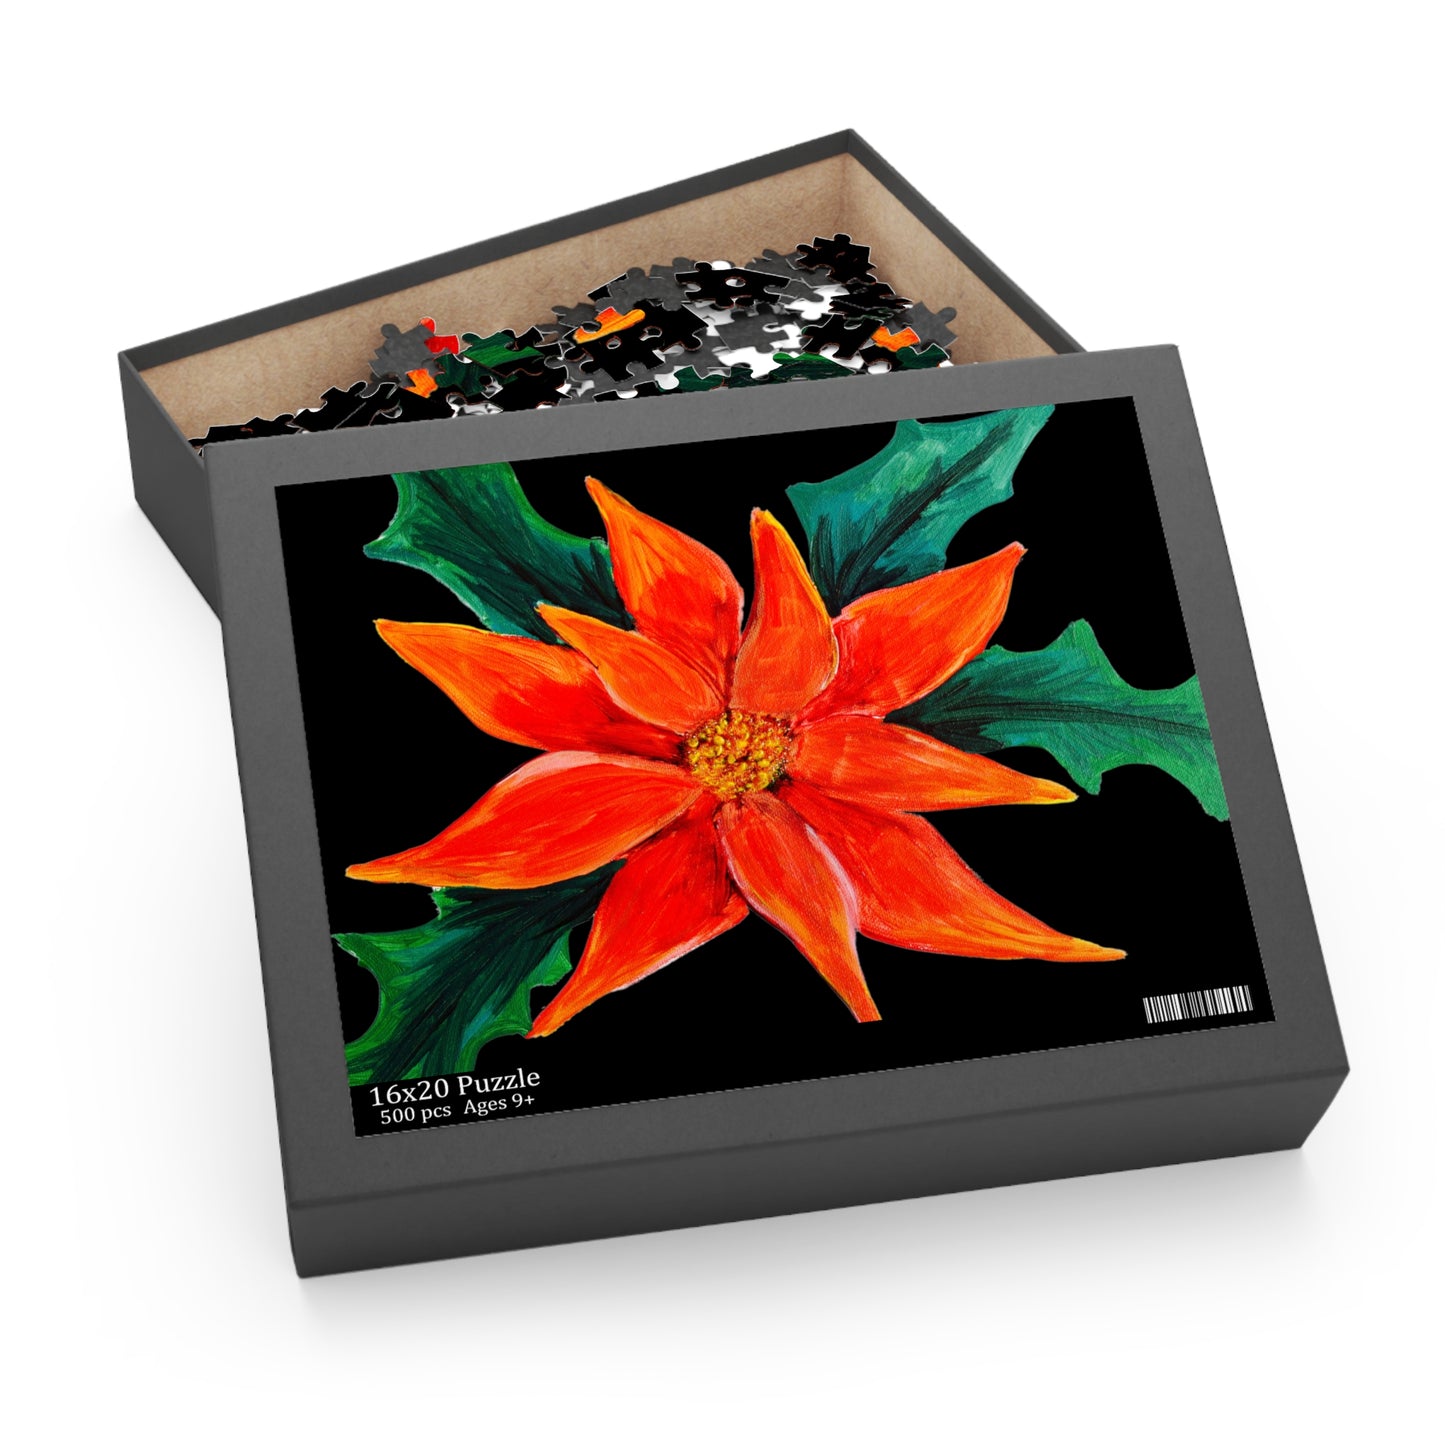 500 piece Jigsaw Puzzle - Holiday flower Puzzle - Jigsaw - Jigsaw puzzle Game